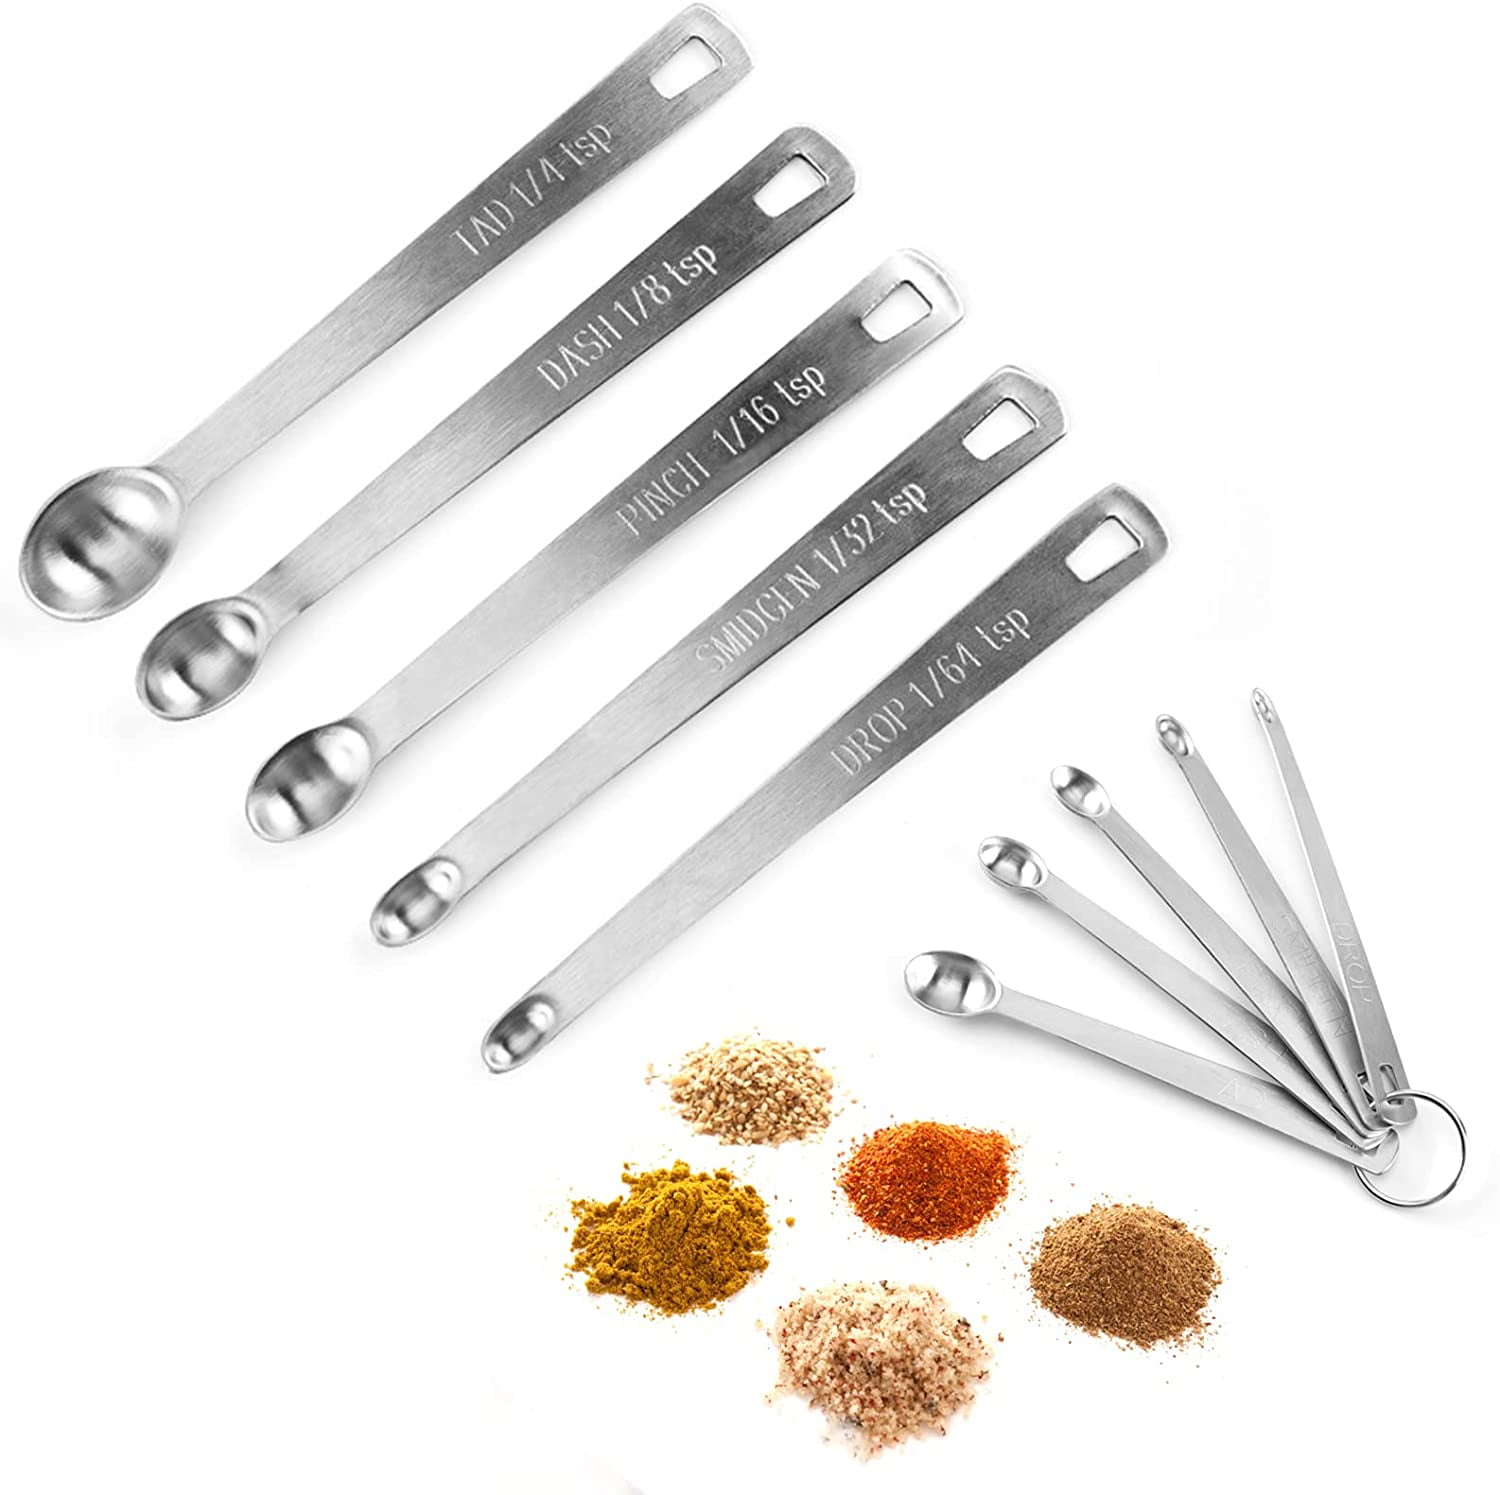  5PCS Small Measuring Spoons Set - Cuttte Stainless Steel Tiny  Measuring Spoons for Cooking Baking, 1/4 tsp, 1/8 tsp, 1/16 tsp, 1/32 tsp,  1/64 tsp, Teaspoon Mini Measuring Spoons for Powders, Spices: Home & Kitchen